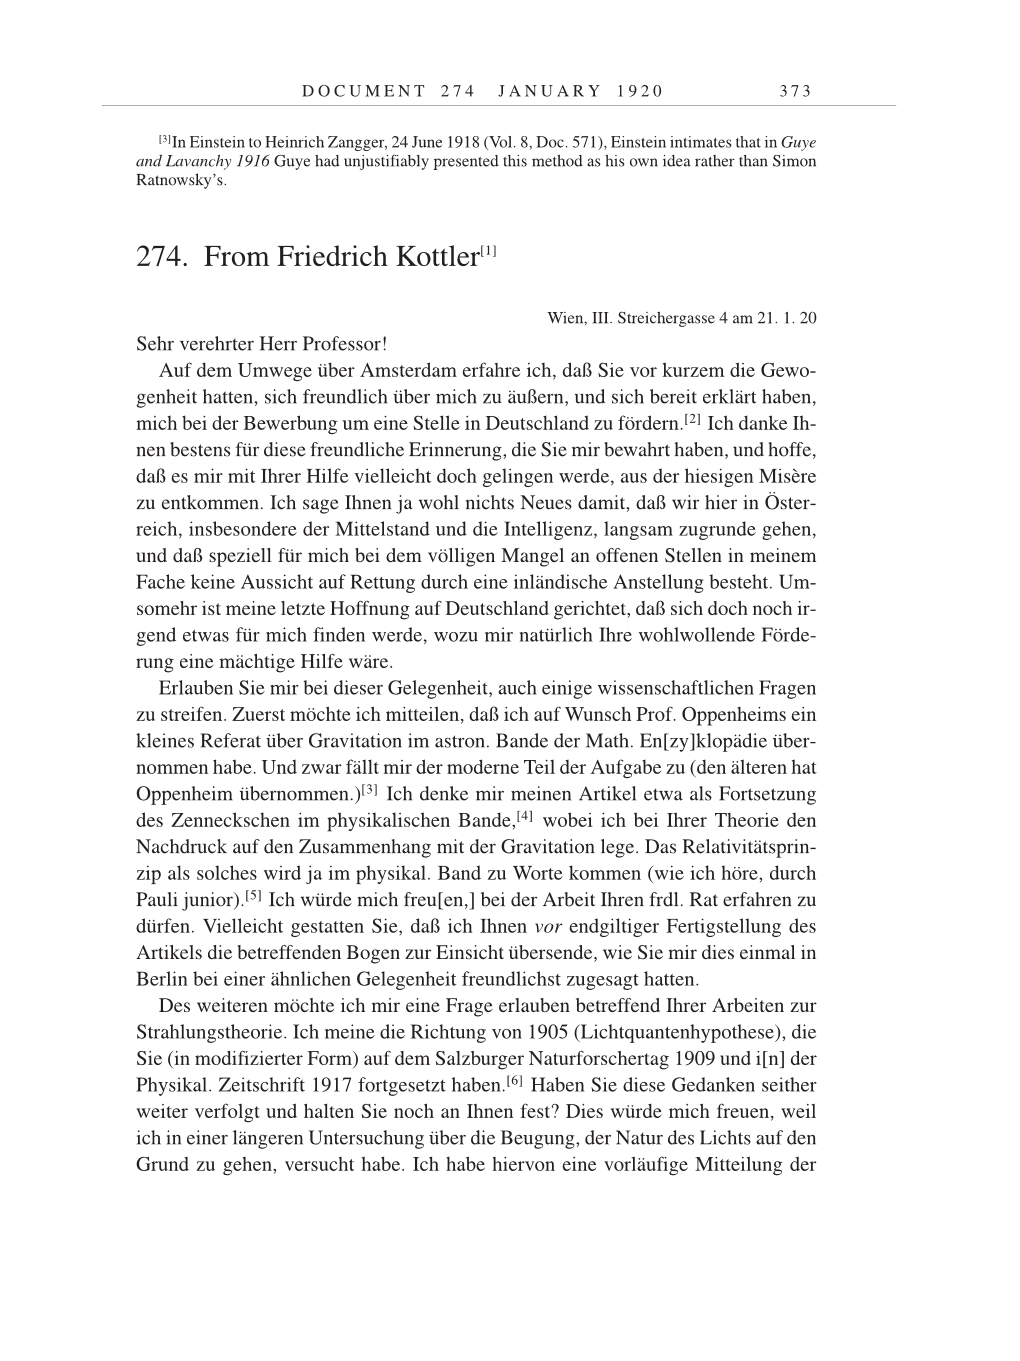 Volume 9: The Berlin Years: Correspondence January 1919-April 1920 page 373